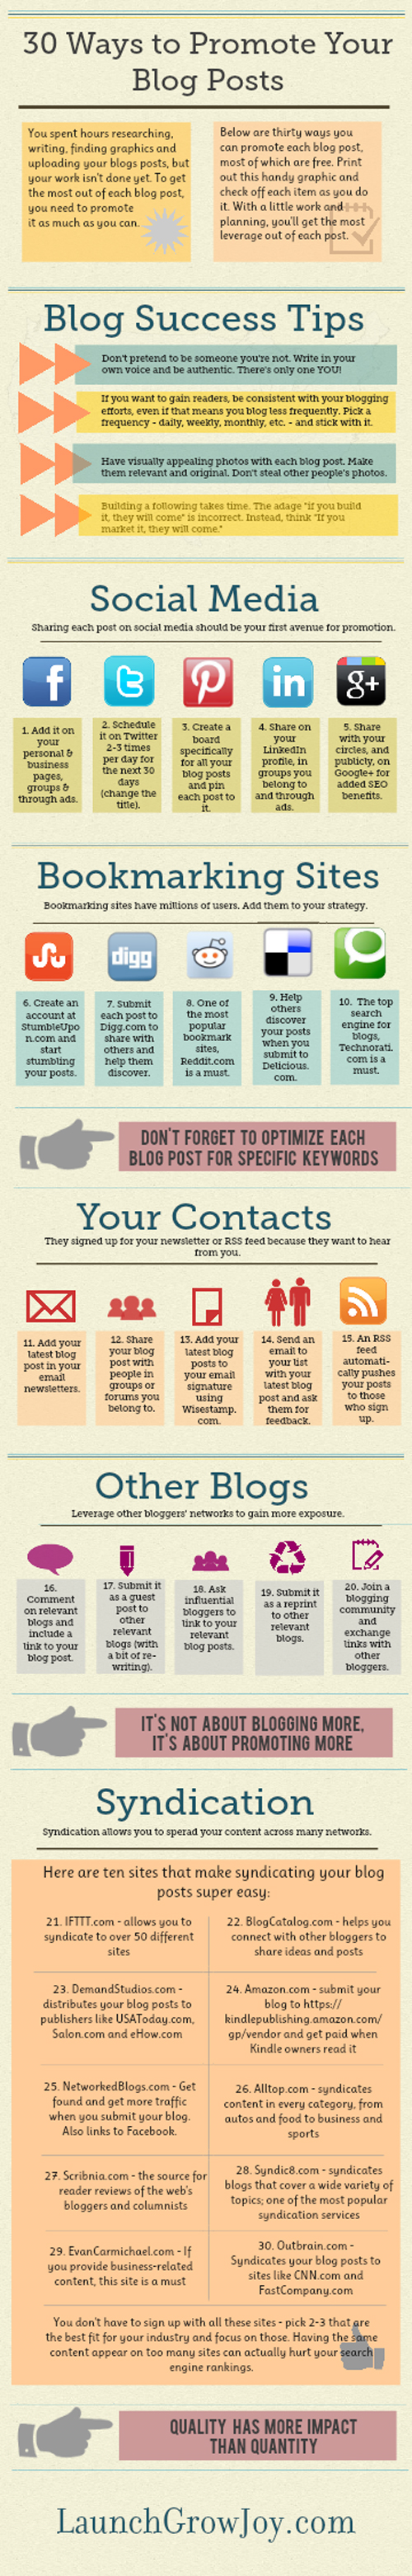 30-ways-to-promote-your-blog